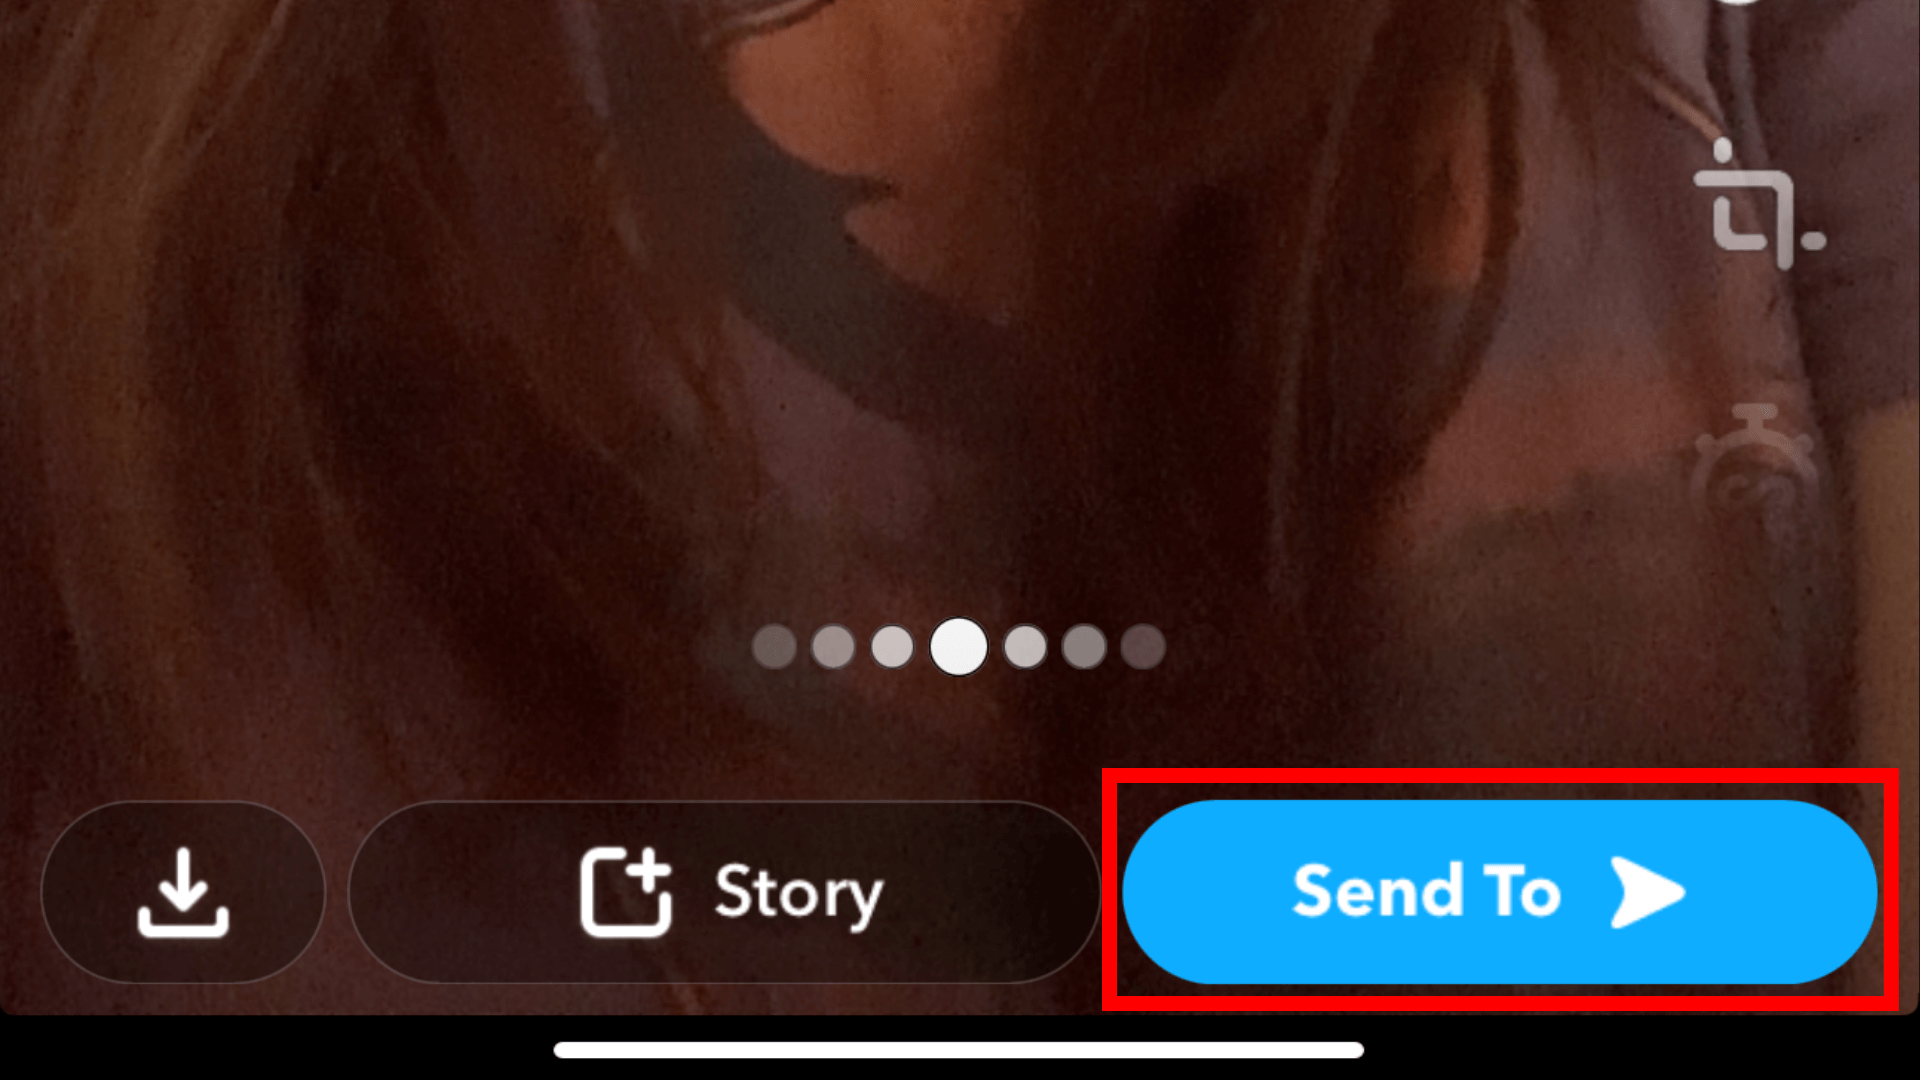 "Send To" button in Snapchat.